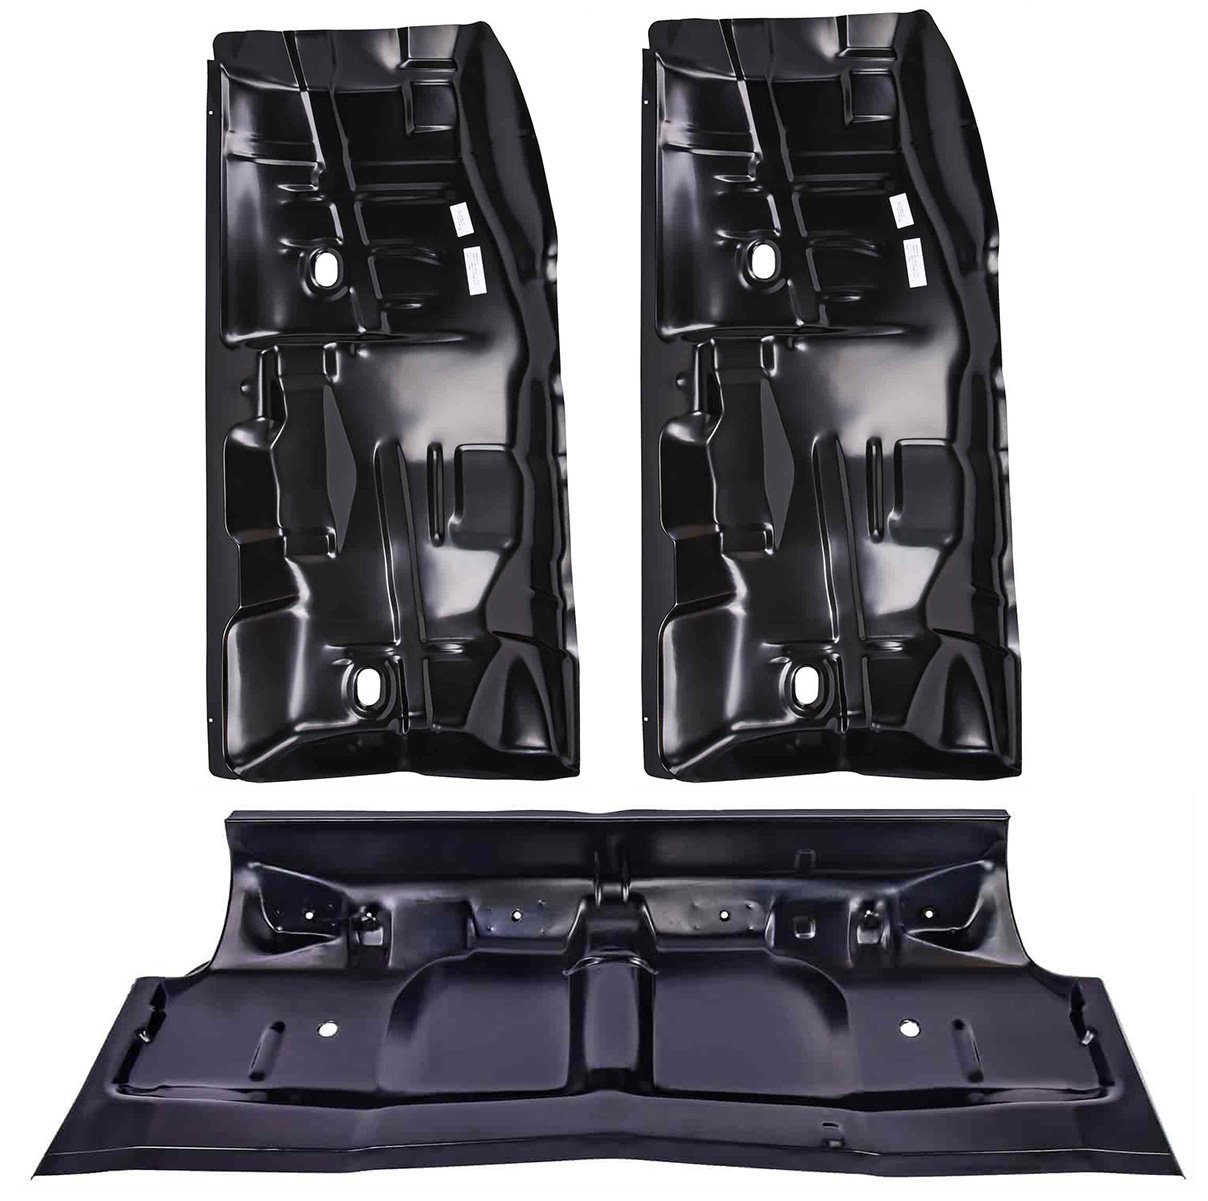 Full-Length and Rear Under Seat Floor Panel Kit Fits Select 1968-1972 Buick, Chevrolet, Oldsmobile, Pontiac Models